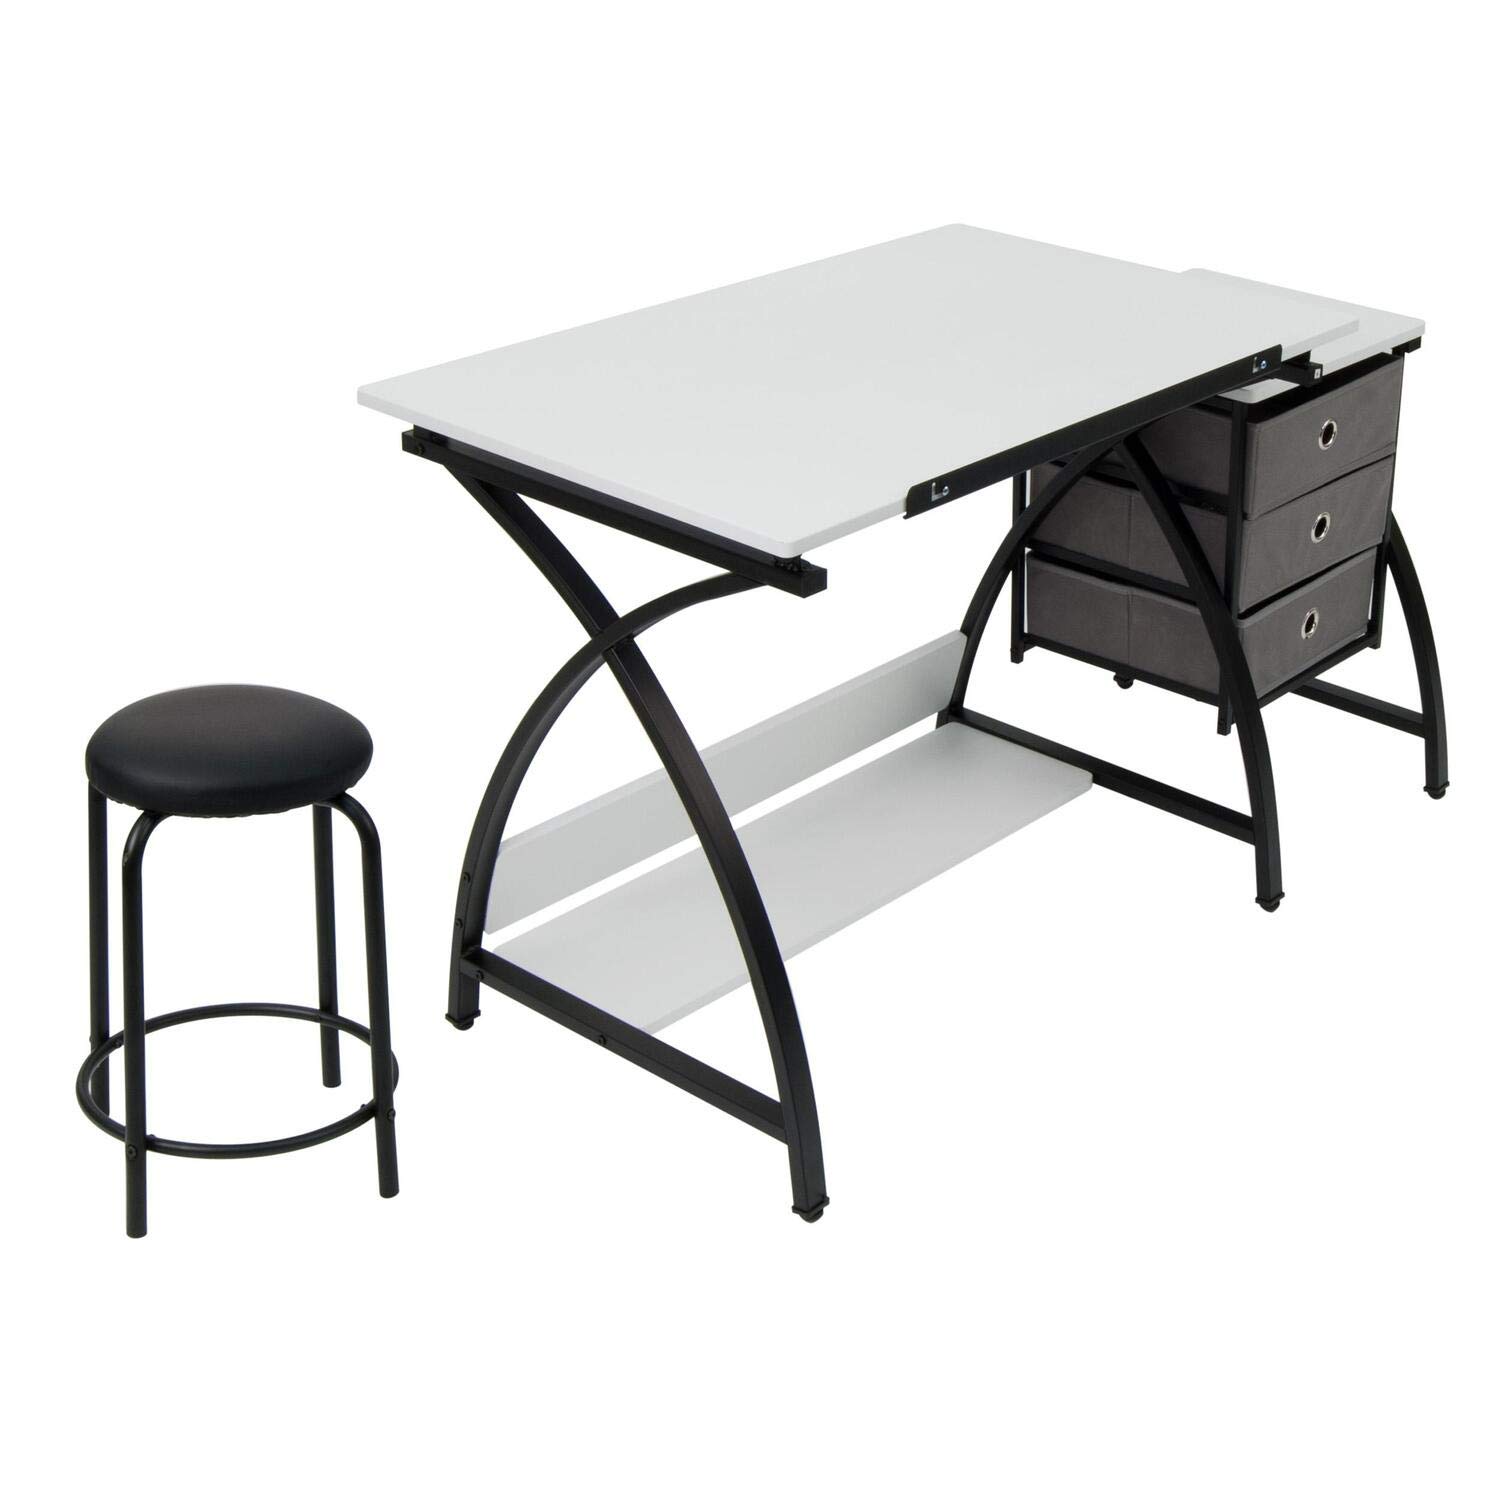 SD STUDIO DESIGNS 2 Piece Comet Craft Table | Angle Adjustable Top and Stool | Blue/Spatter Gray